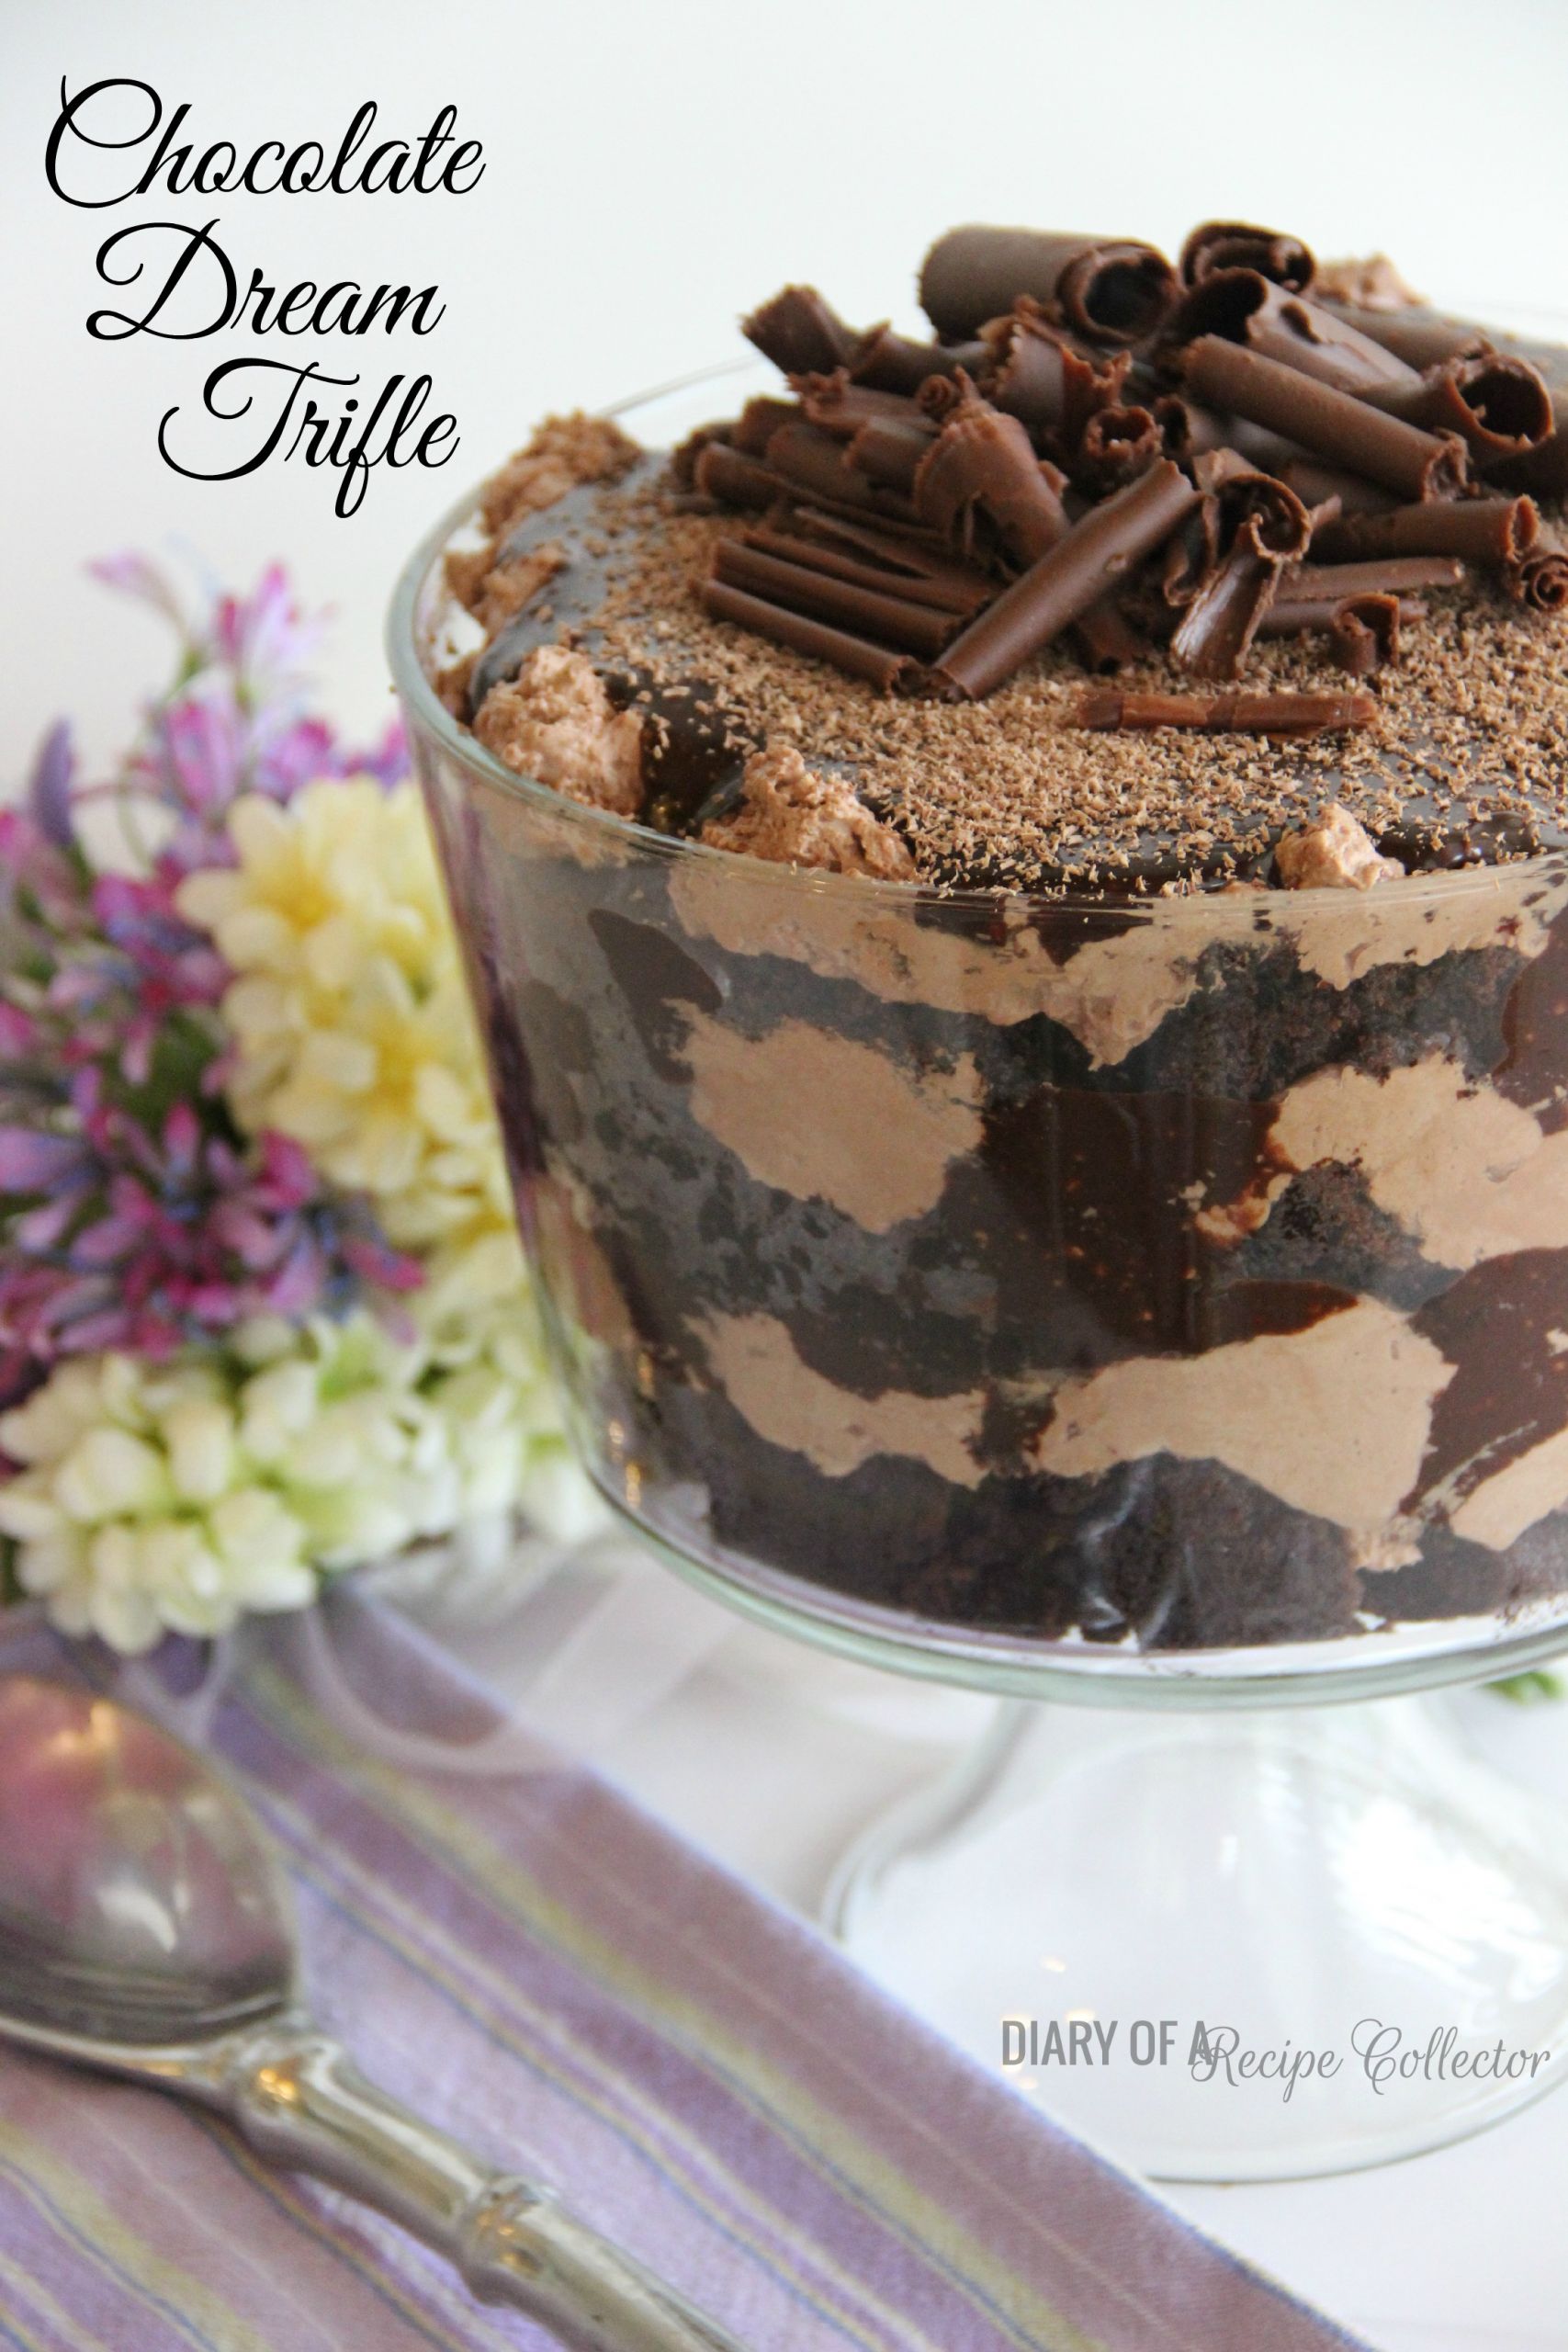 Chocolate Mousse Trifle
 Chocolate Dream Trifle Diary of A Recipe Collector